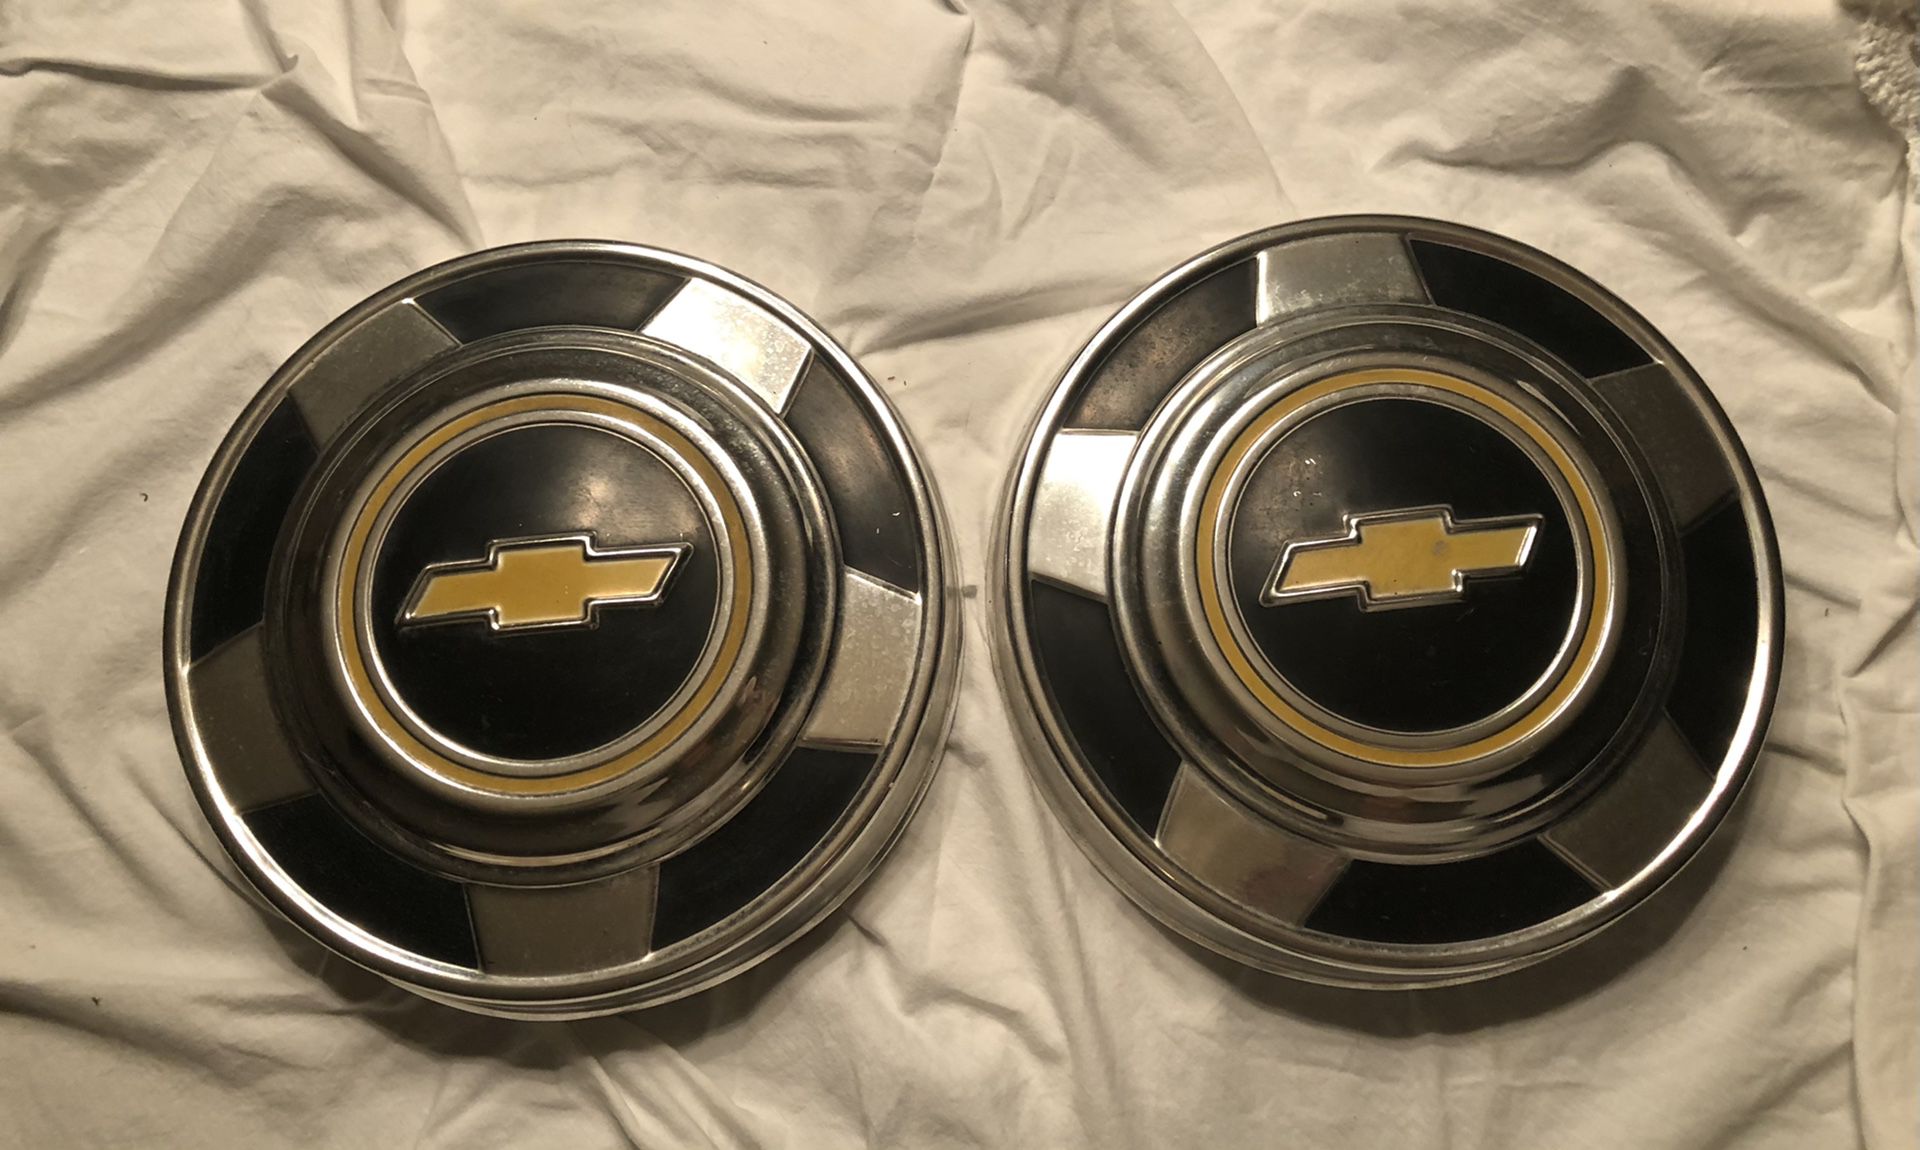 1973-1987 Chevy 1/2 ton truck hubcaps